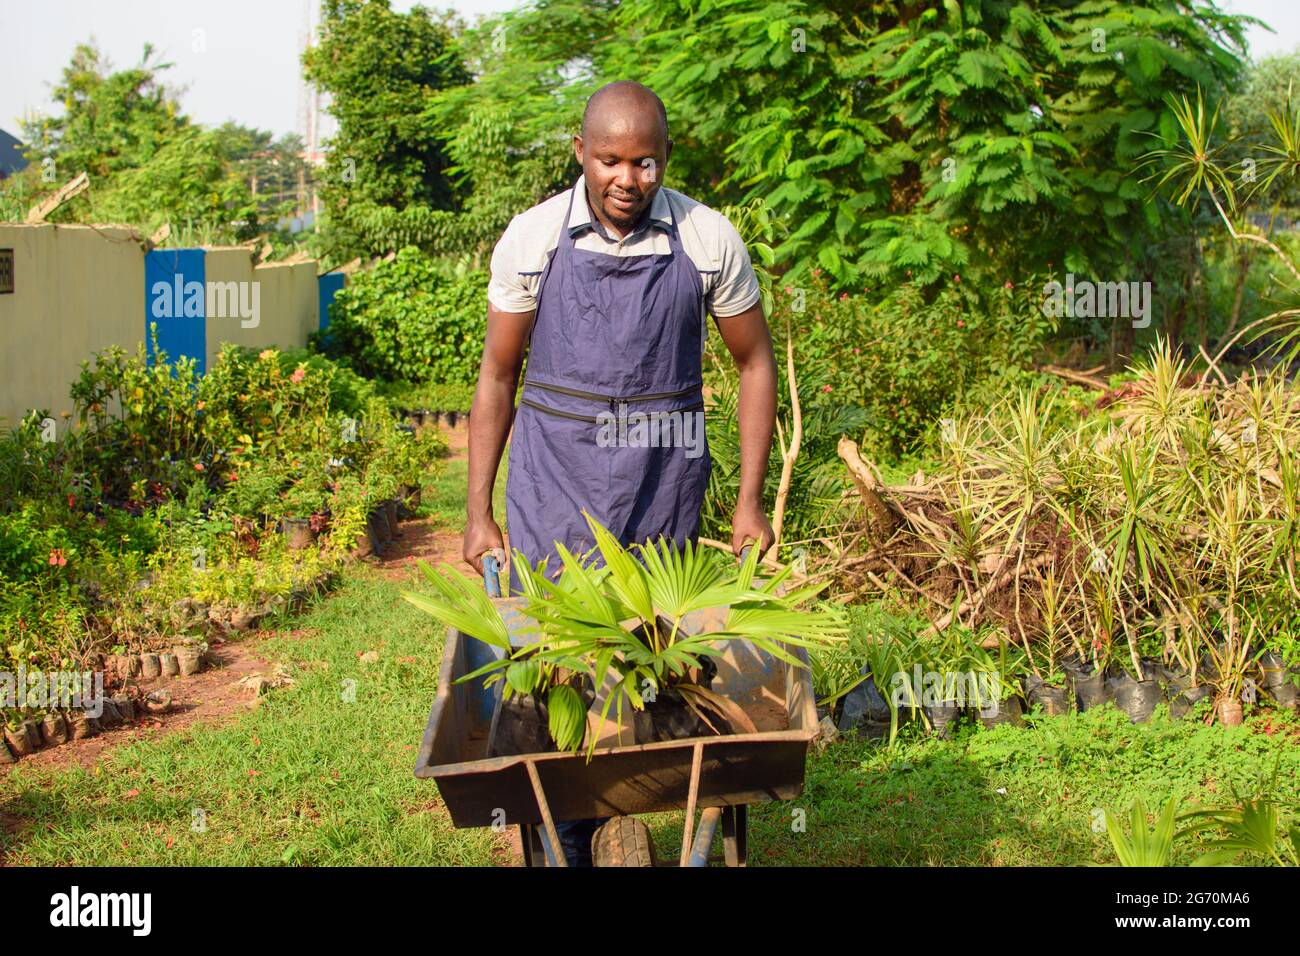 African male gardener, florist or horticulturist wearing an apron, working and pushing a wheel barrow filled with plants in a colorful flower garden Stock Photo